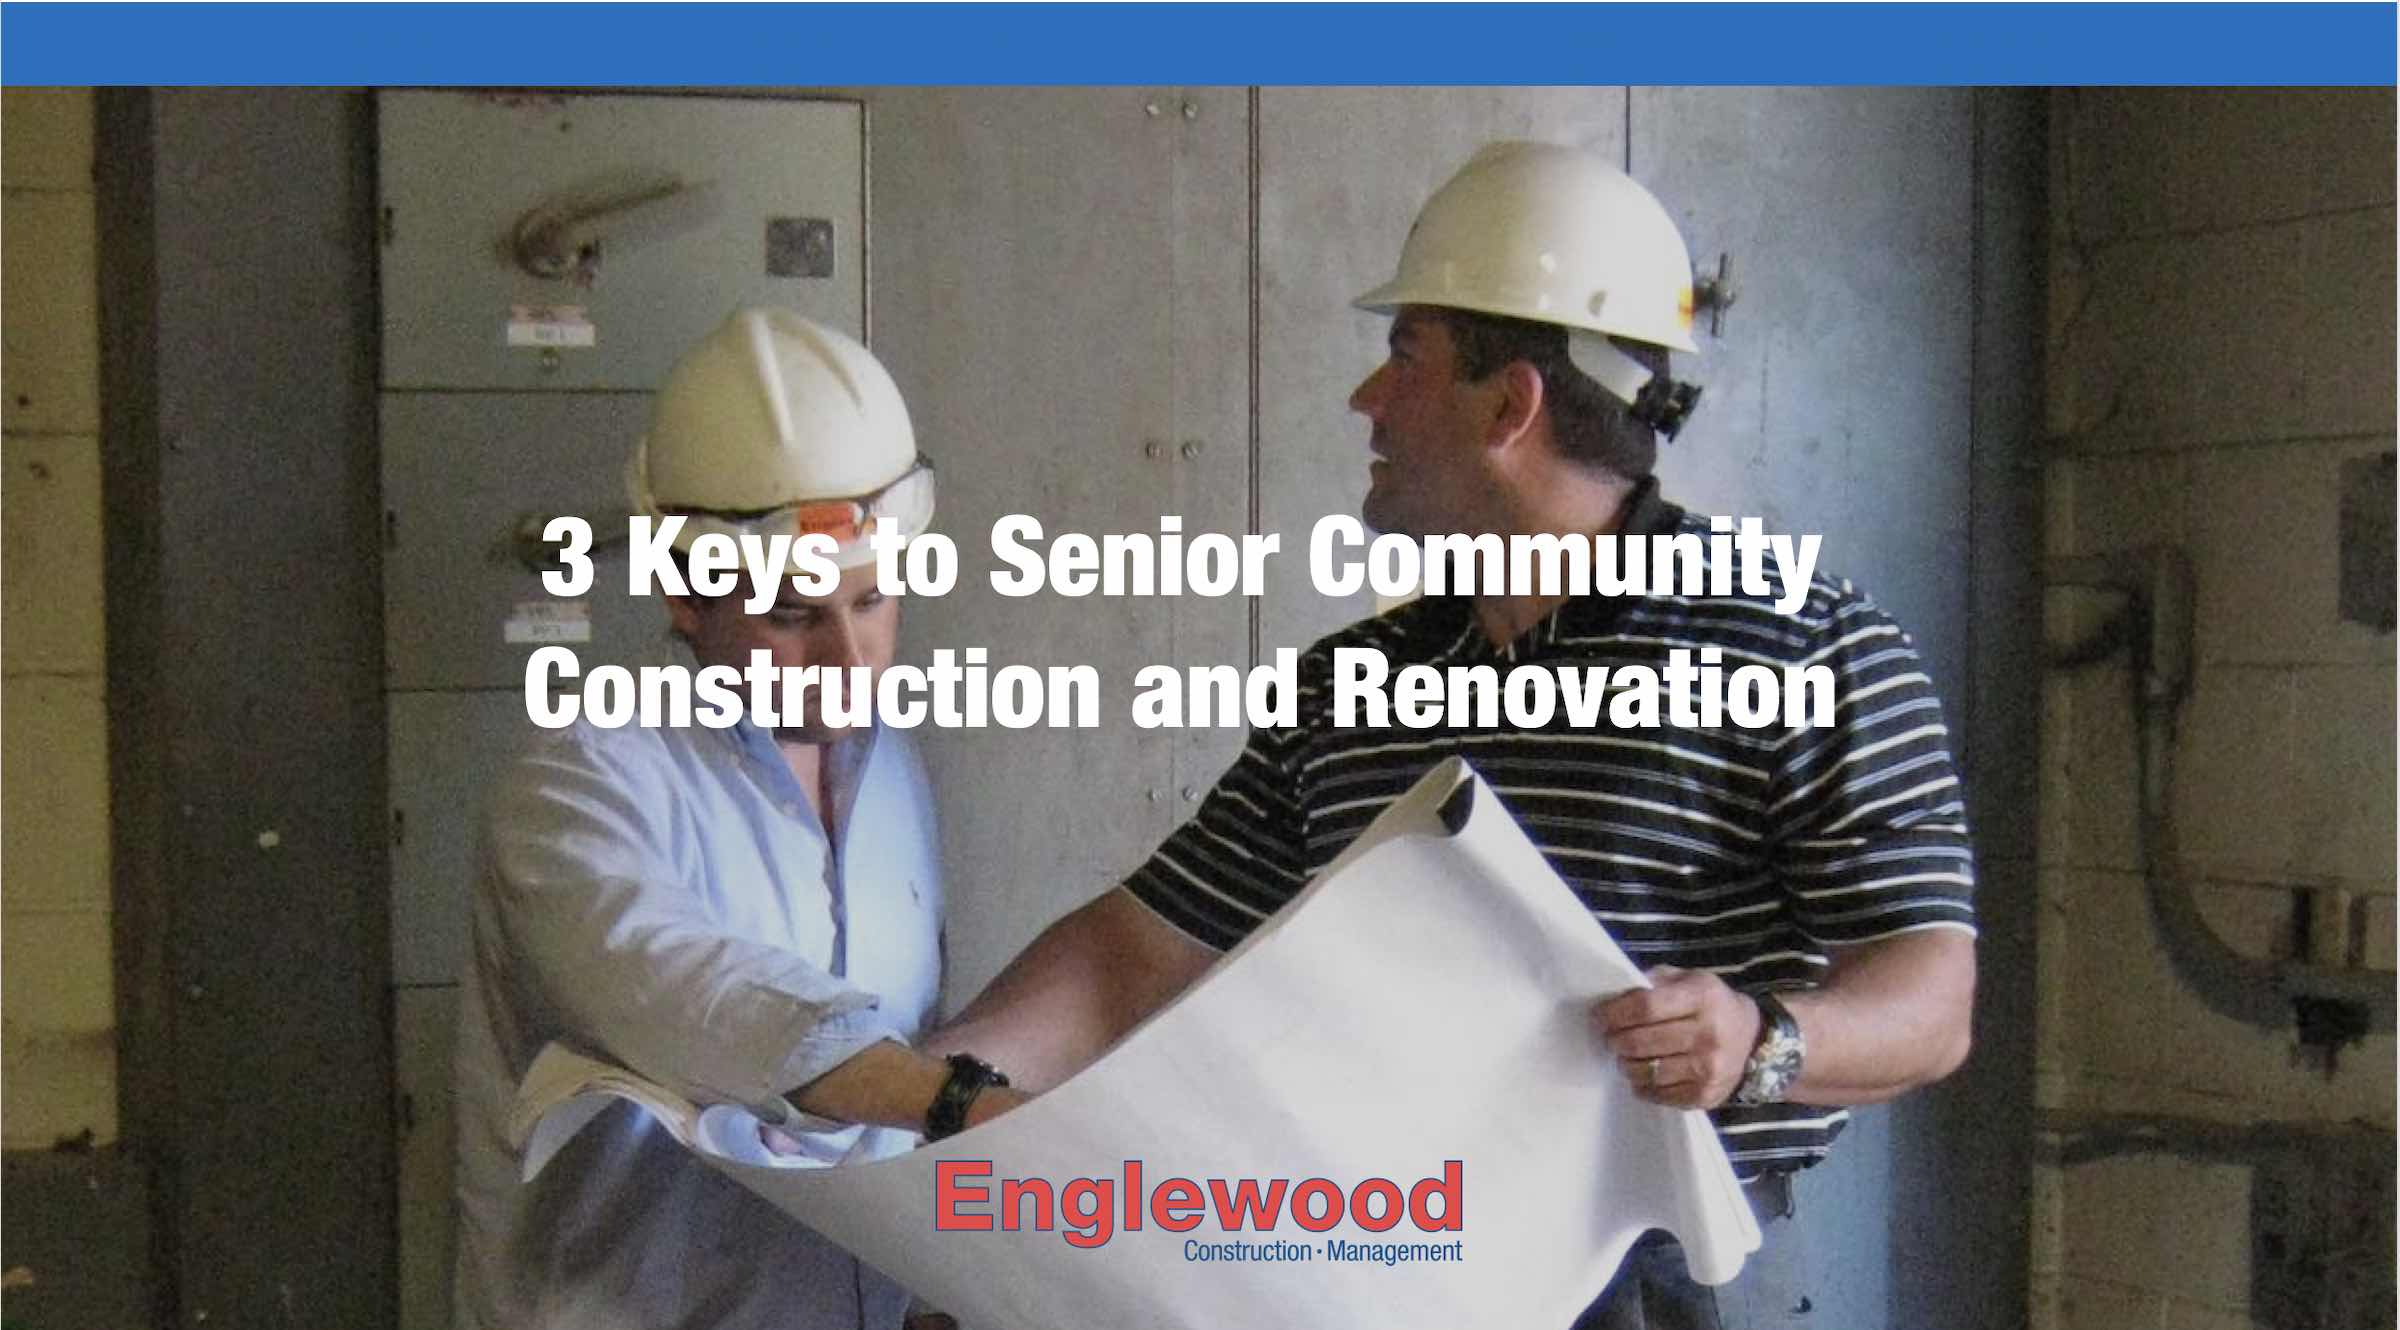 3. Take extra steps to keep residents happy and safe when renovating an occupied senior community.  There are always special considerations for a construction project in a facility that is open for business, and that is especially true with a senior housing community that residents consider their home. Not only is it critical to ensure all the appropriate construction safety precautions are in place to protect residents and their guests from any hazards associated with work taking place, but it is also imperative to schedule considerate construction work hours and follow strict daily cleanup procedures. Communication is also extremely important in this setting, so we carefully choose our project superintendents for senior community projects. Residents are naturally interested in the work taking place, so the construction team needs to be ready to field questions and interact with residents in a way that will make the project a positive experience for everyone.  Autumn green: The Autumn Green – Wright Campus in Chicago, Illinois, offers its residents a prairie-style design campus lifestyle, including games rooms, restaurant-style dining, salons, and more. Englewood provided Construction Management and Pre-construction Services